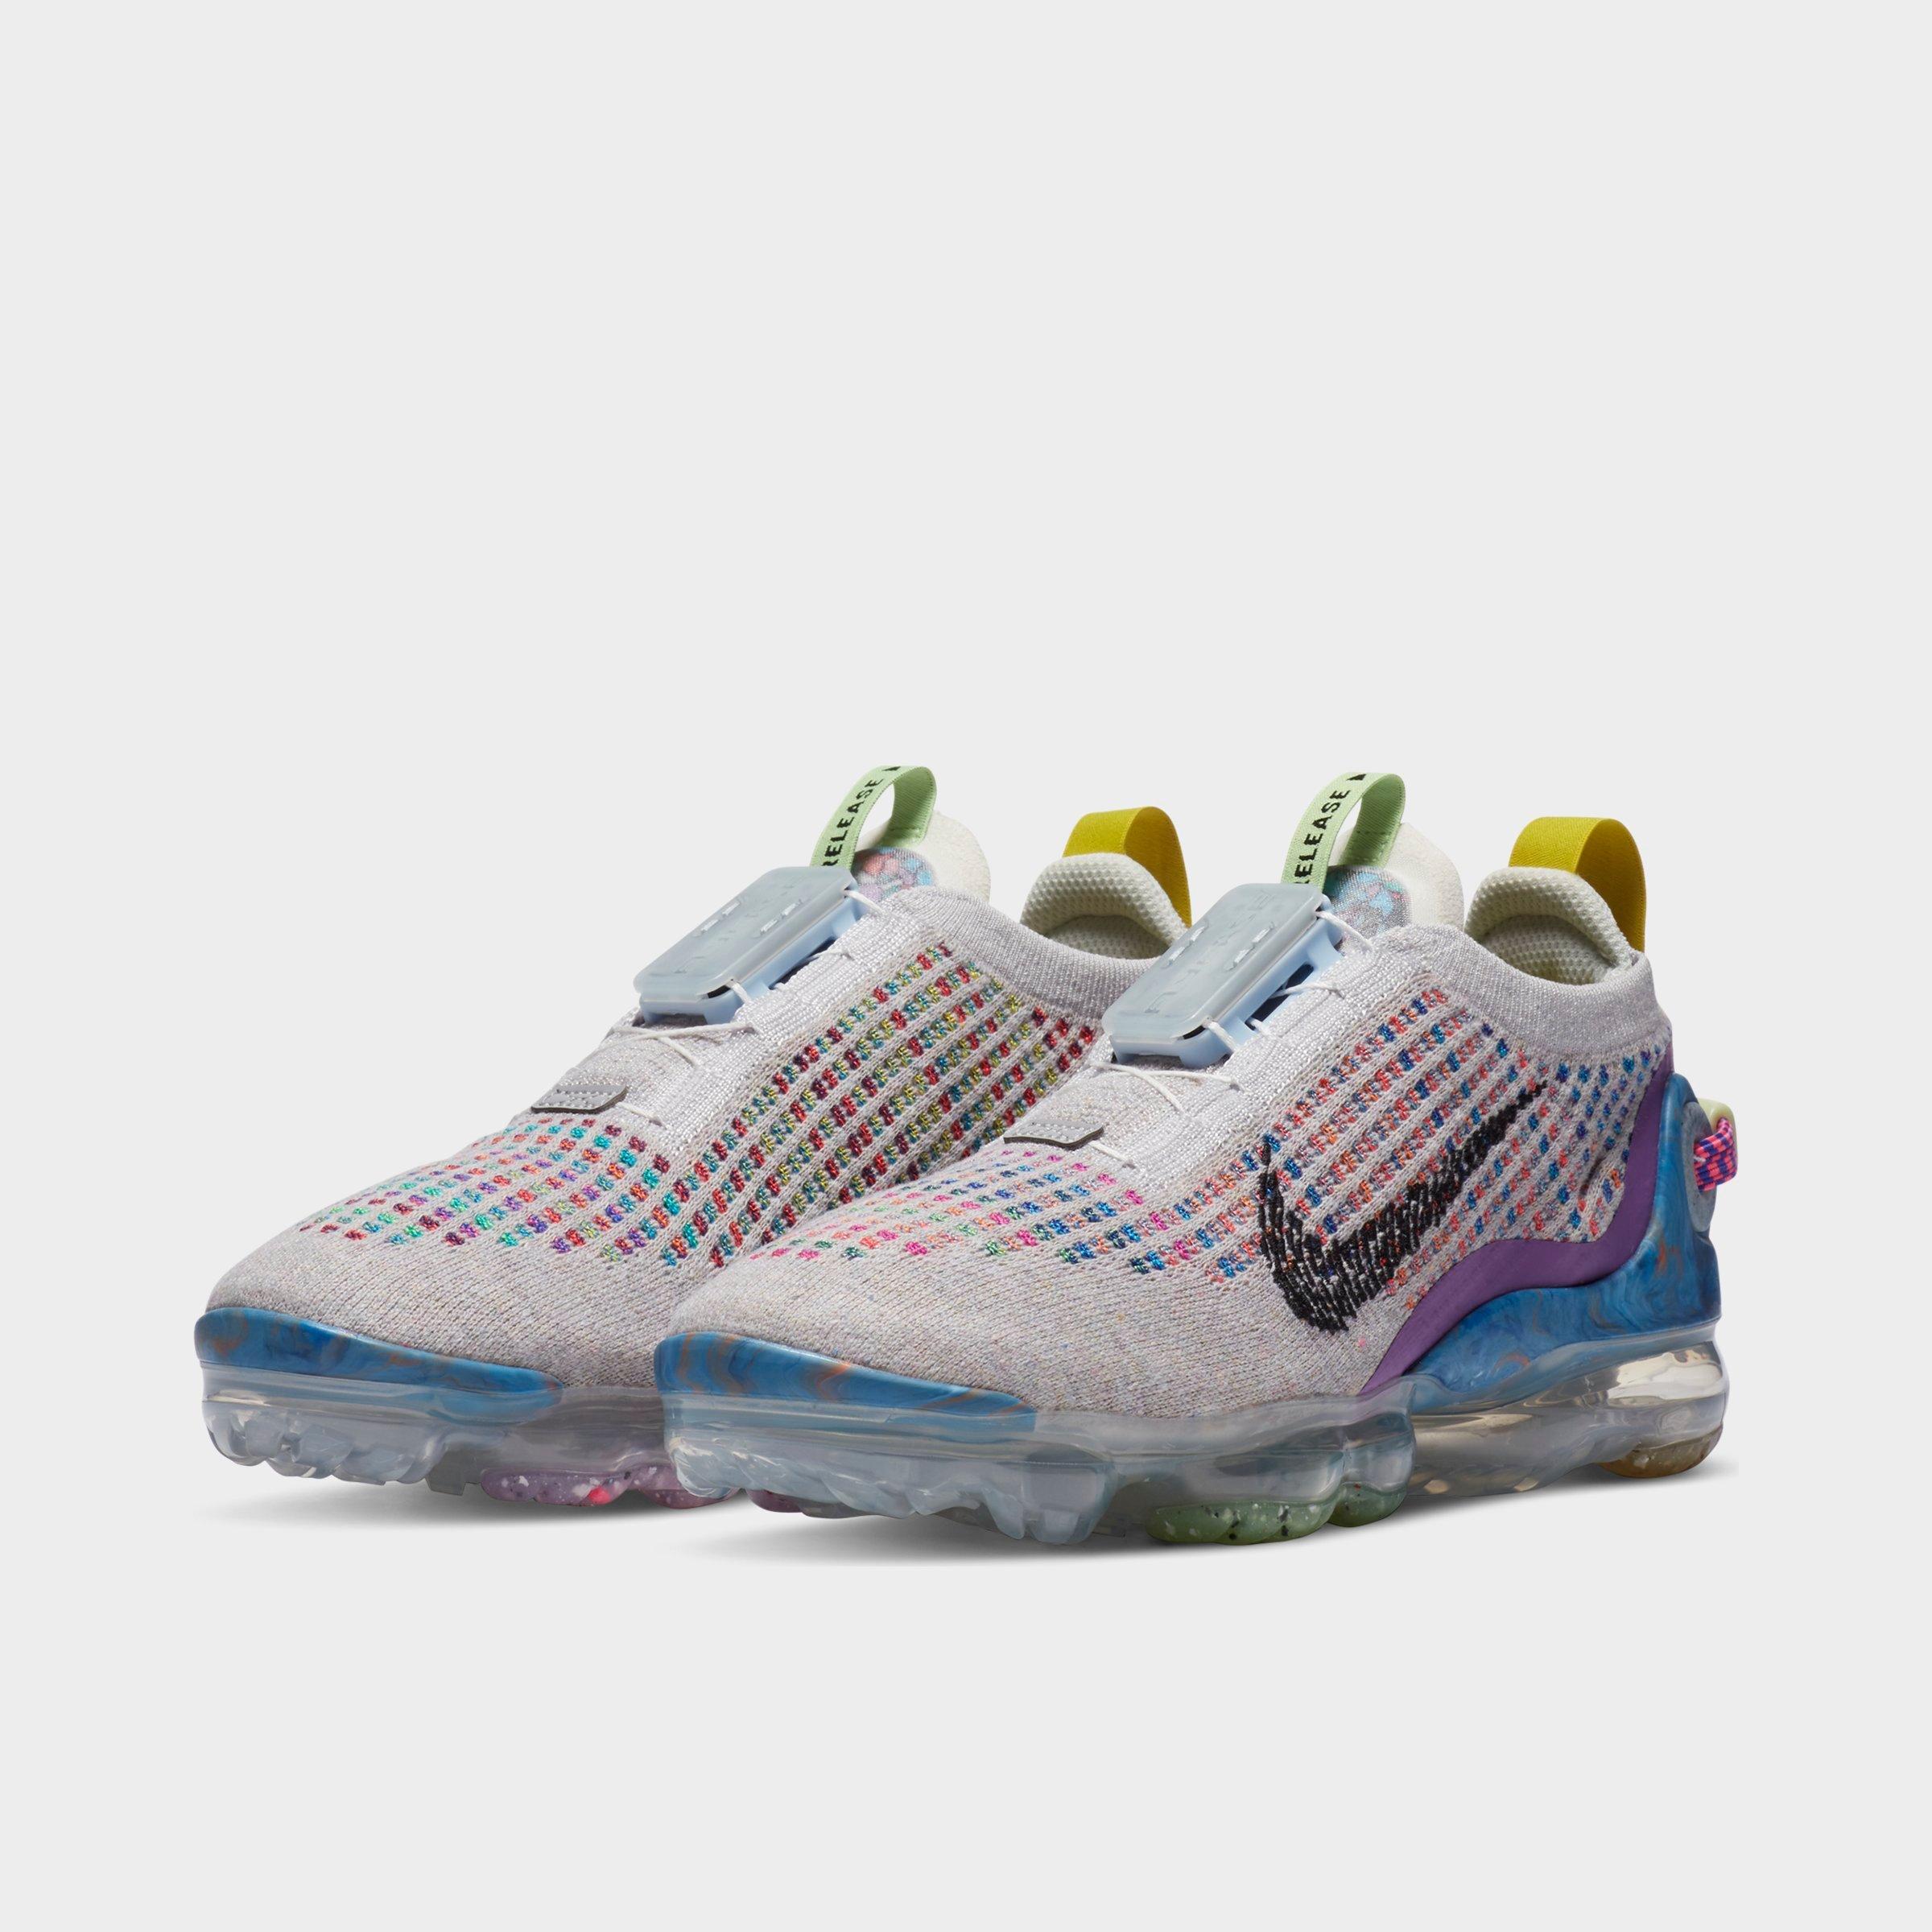 nike multicolor running shoes